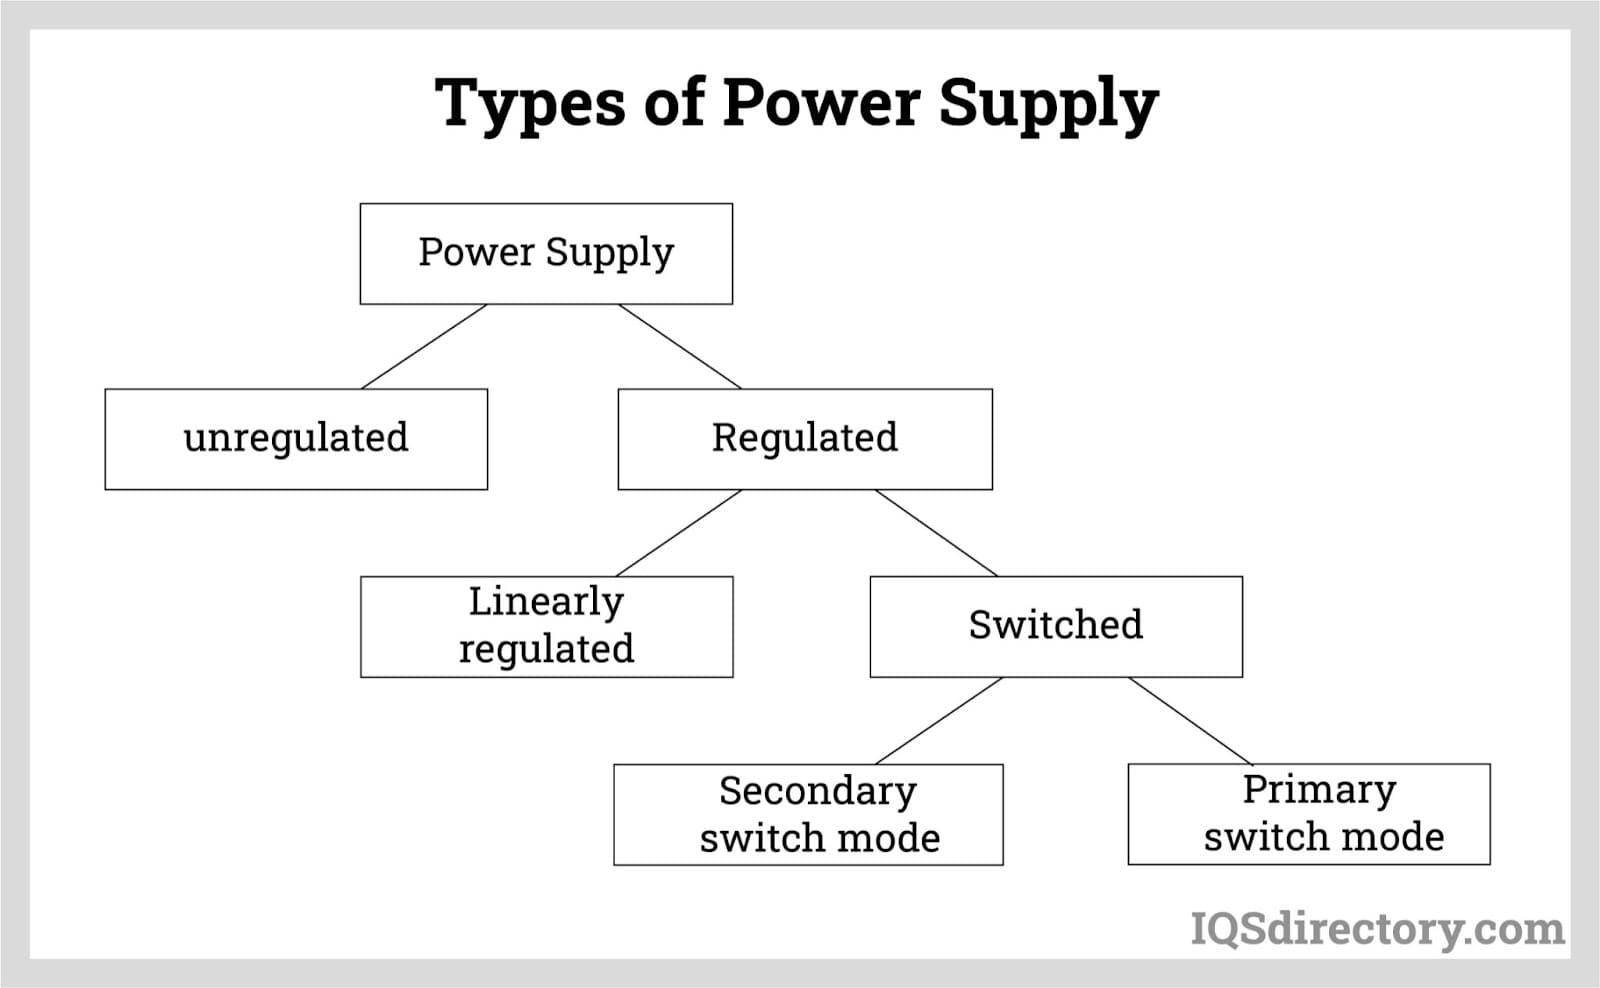 DC Power Supply: What Is It? Where Is It Used? AC vs. DC